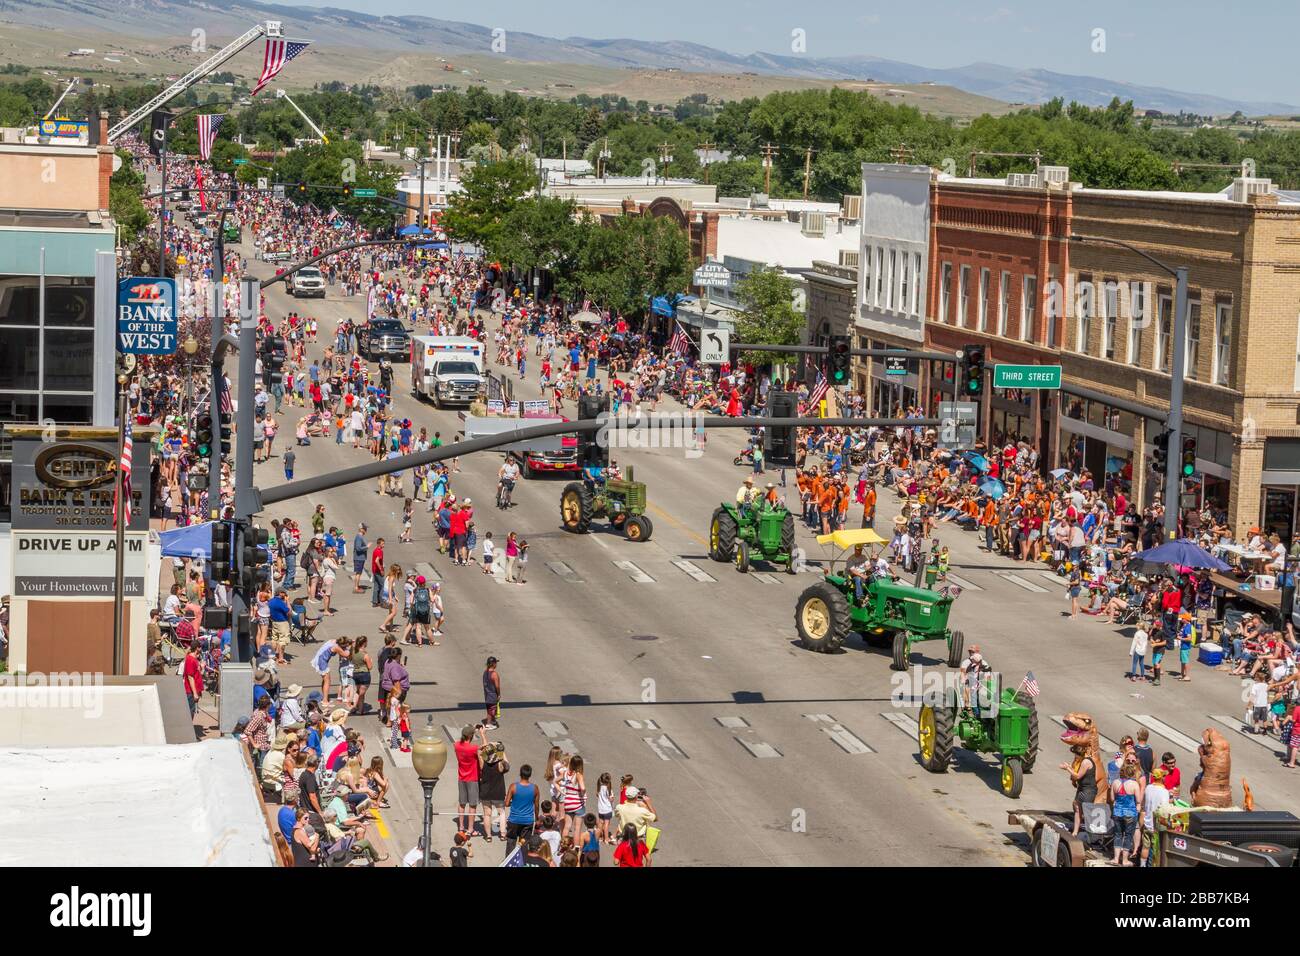 The Lander parade route. Stock Photo